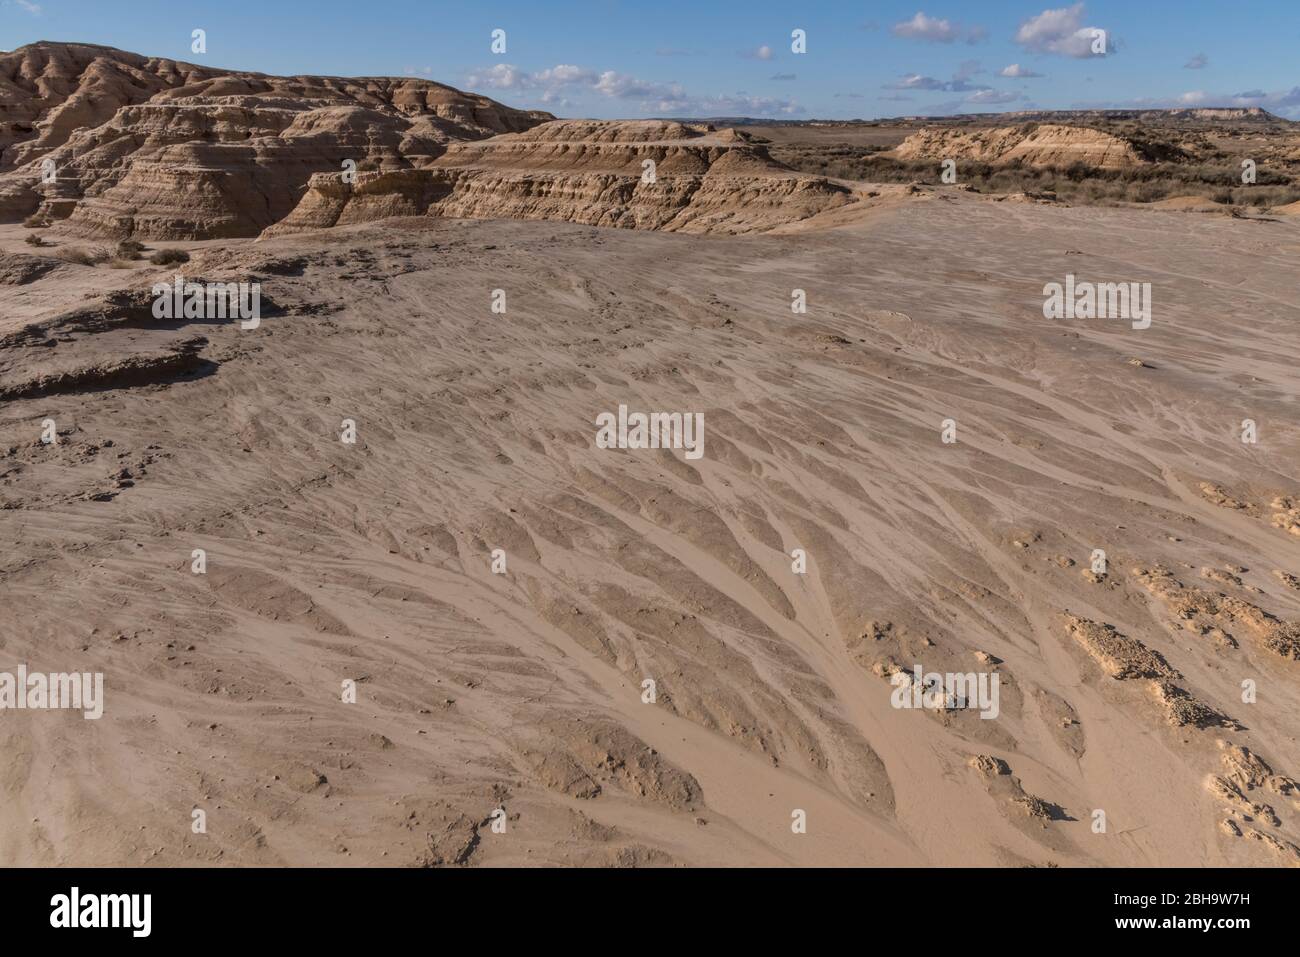 Roadtrip in winter through the semi-desert Bardenas Reales, Navarra, Spain. A UNESCO Biosphere Reserve with among others Castil de Tierra, Pisquerra Mountains and Bardena Blanca. Beautiful patterns in the clay after the rain Stock Photo